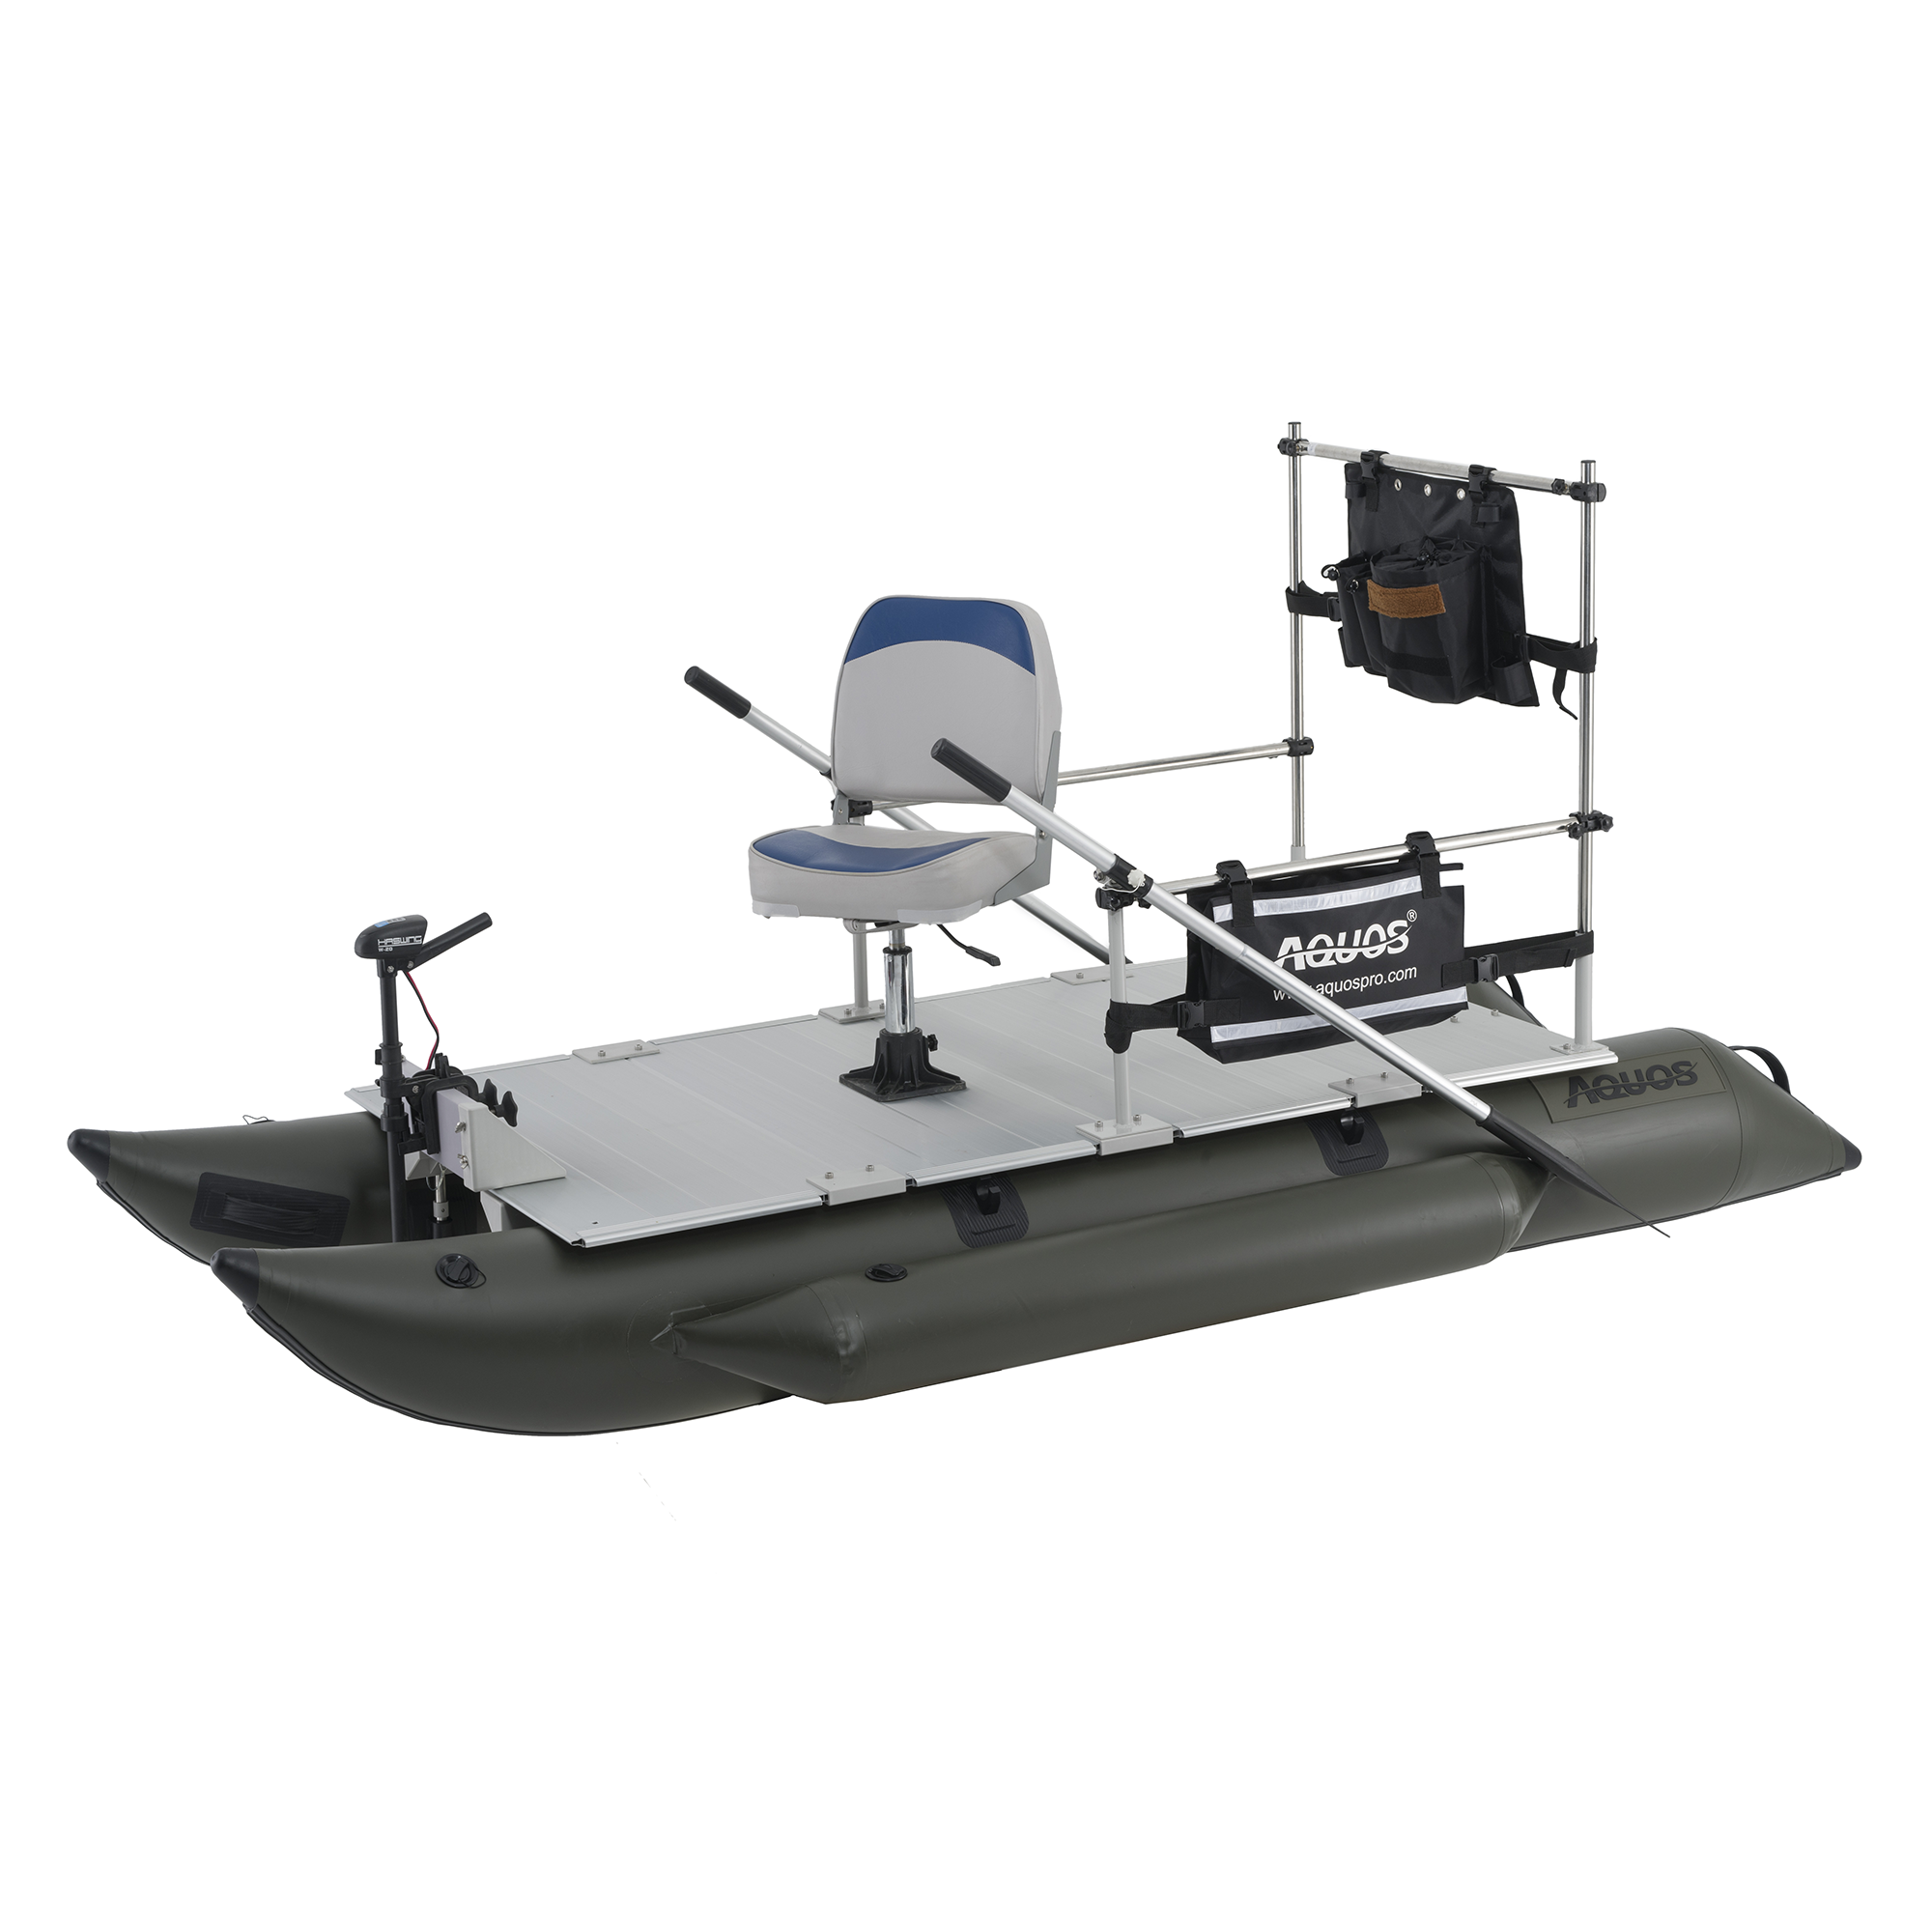 AQUOS New Heavy-Duty for One Series 10.2plus ft Inflatable Pontoon Boat with Haswing Bow Mount 12V 20lbs Hand Control Trolling Motor